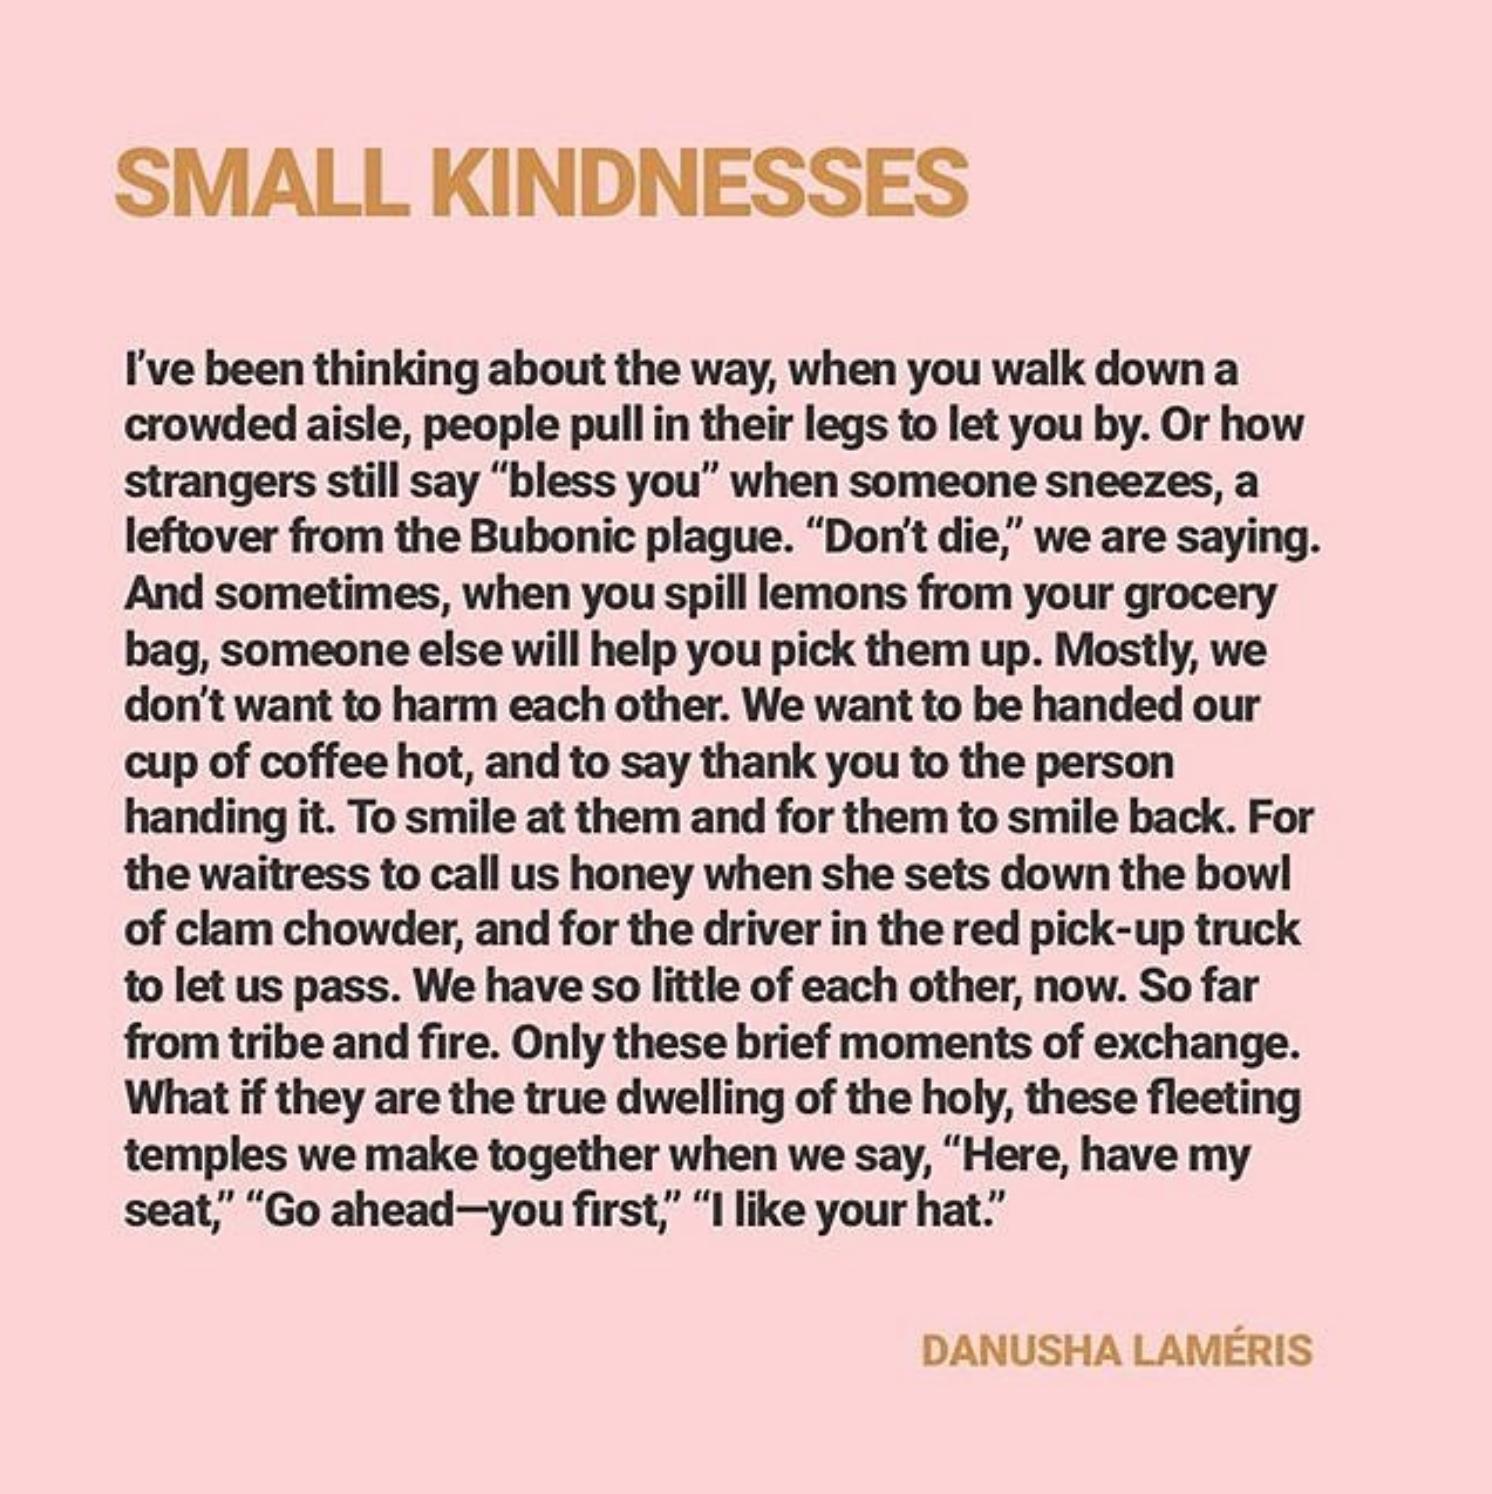 small kindnesses but more